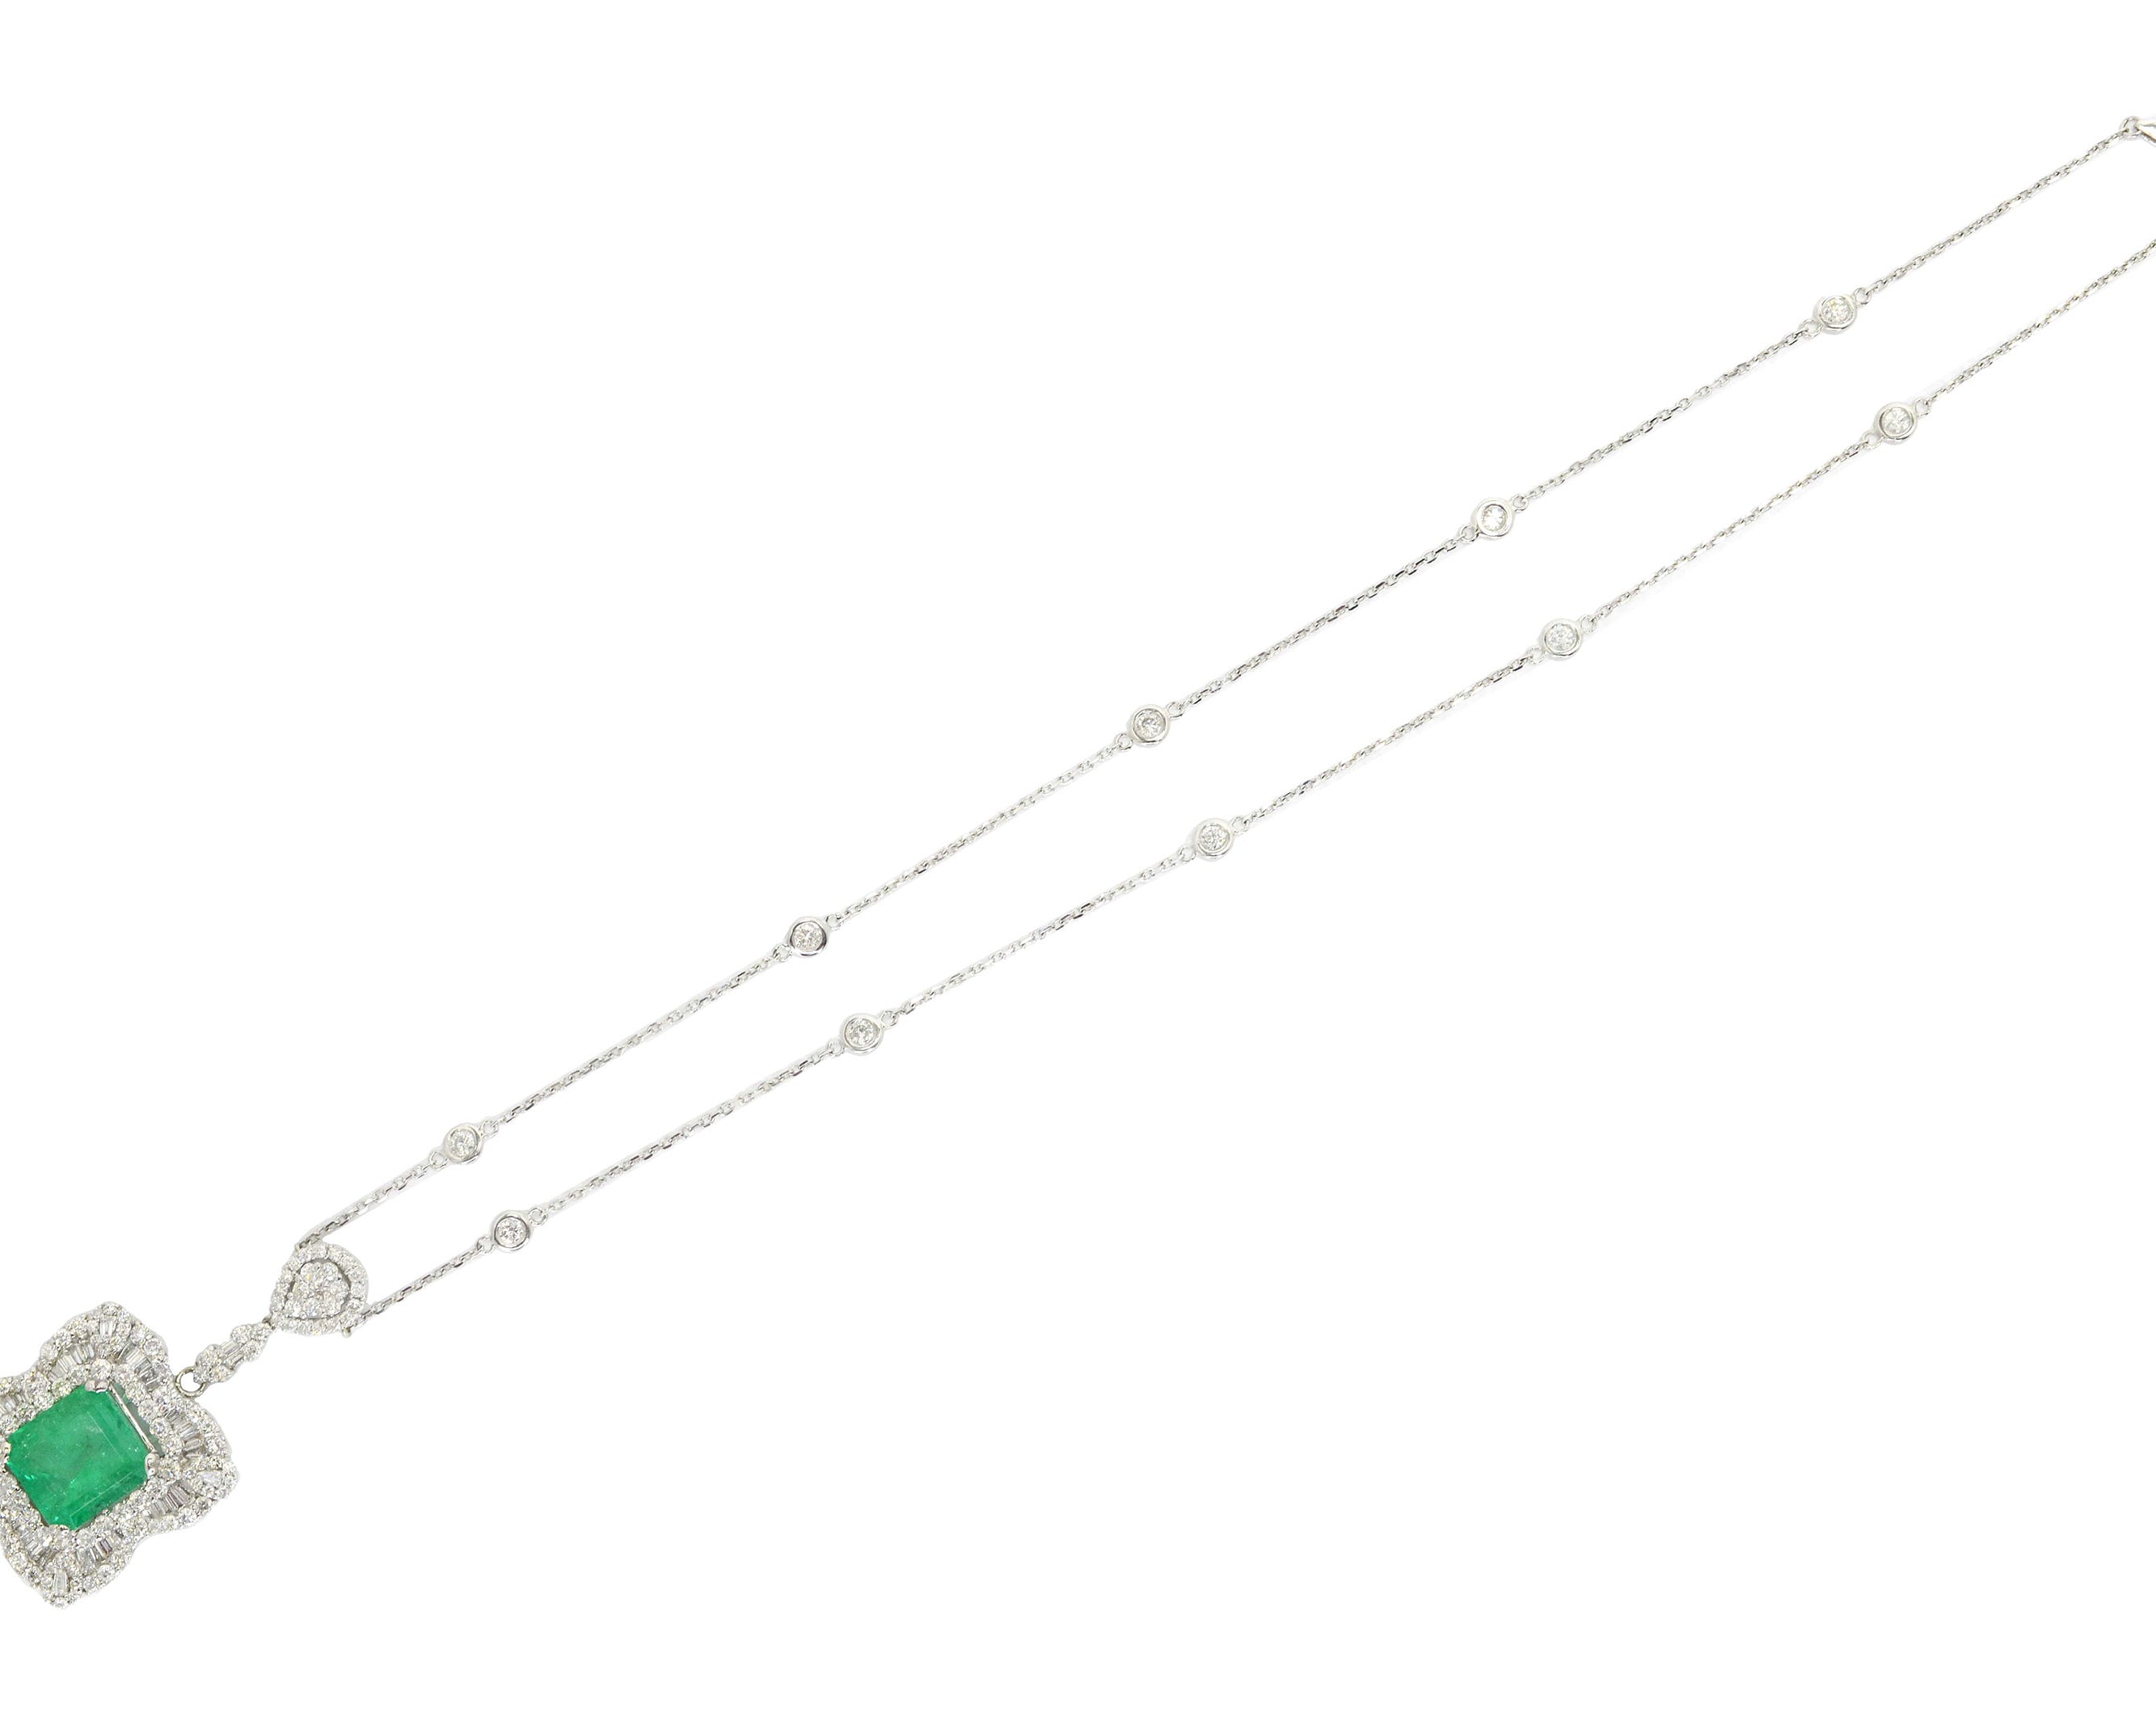 The pendant of 18kt white gold is suspended by a 14kt white gold diamonds by the yard chain measuring 18" long.